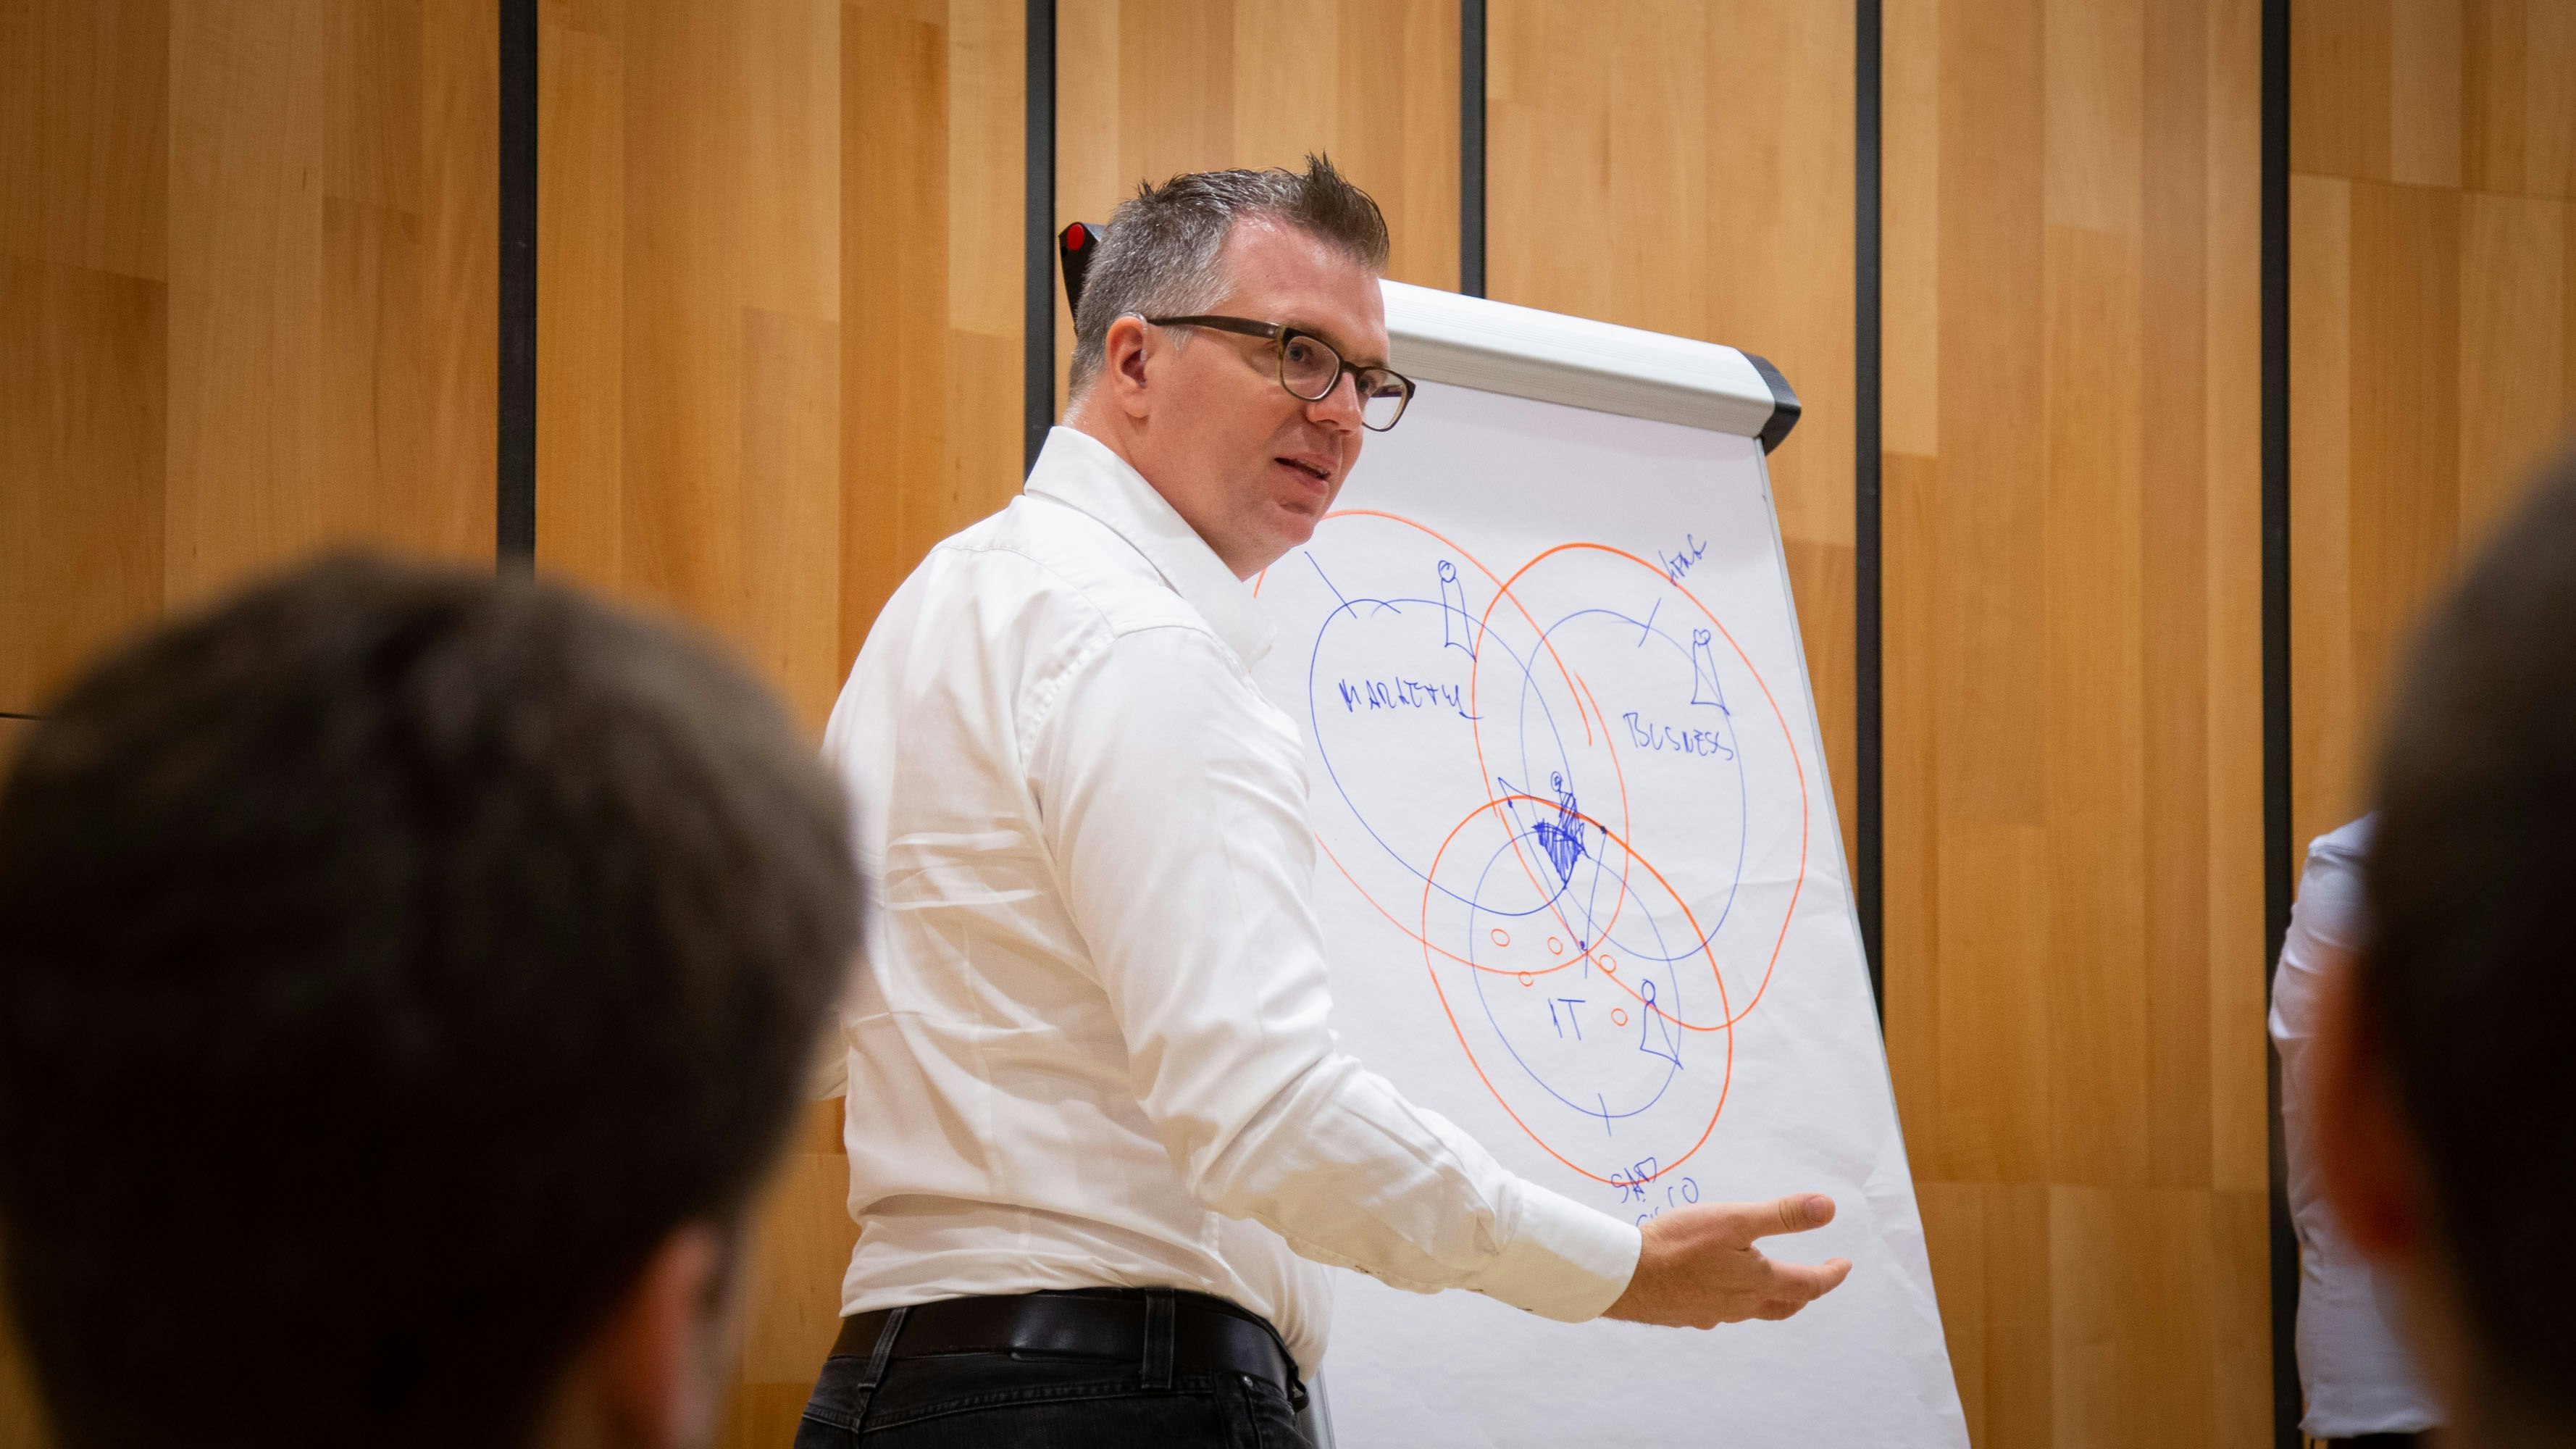 Jonathan Möller in a white shirt presenting in front of a flipchart